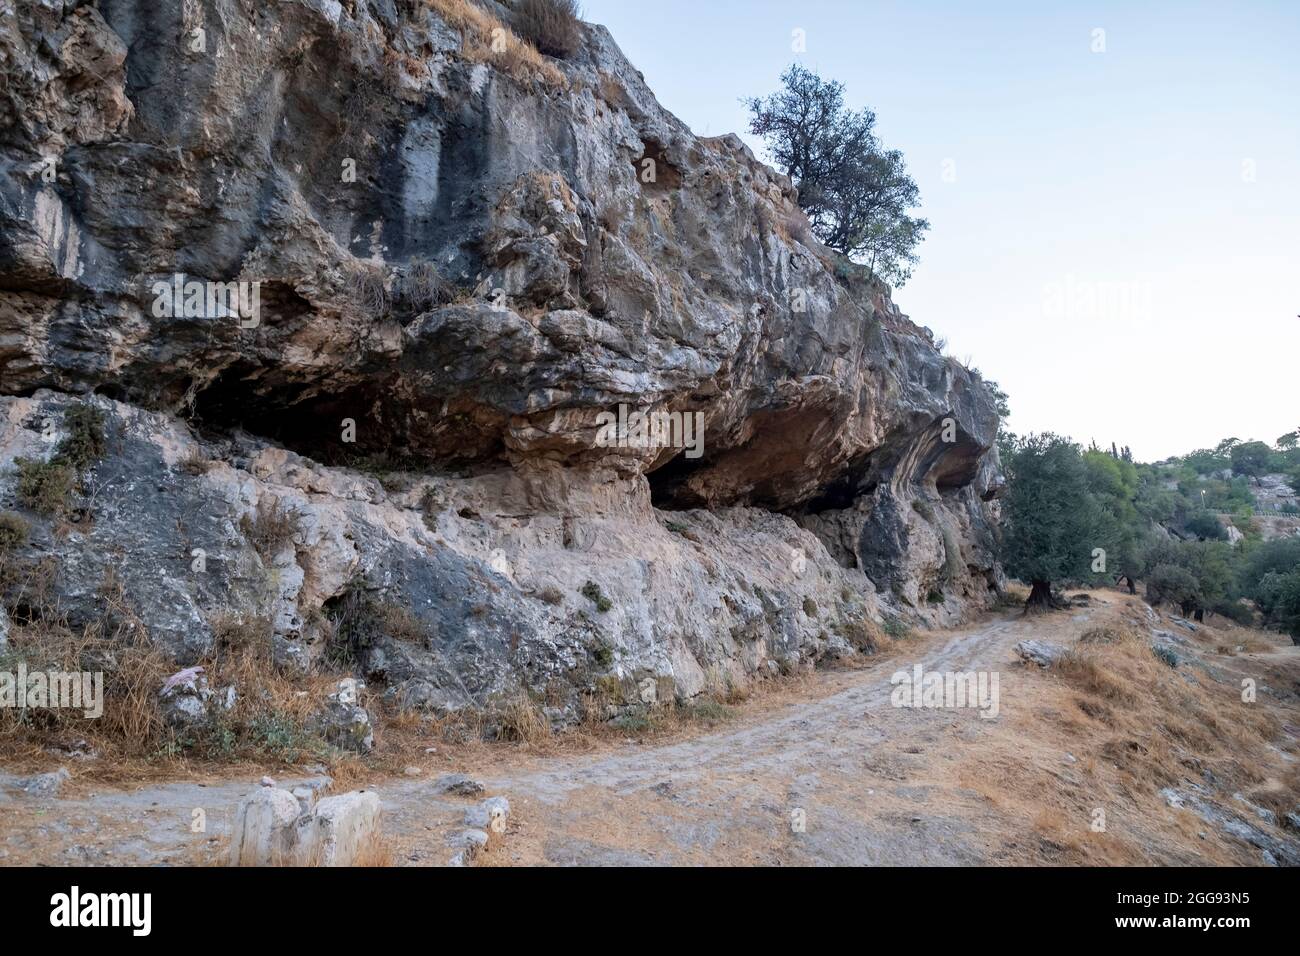 View of rock cut burial chambers that were reused by generations of families from as early as the seventh until the fifth century BC in Valley of Hinnom the modern name for the biblical Gehenna or Gehinnom valley surrounding Jerusalem's Old City, Israel Stock Photo